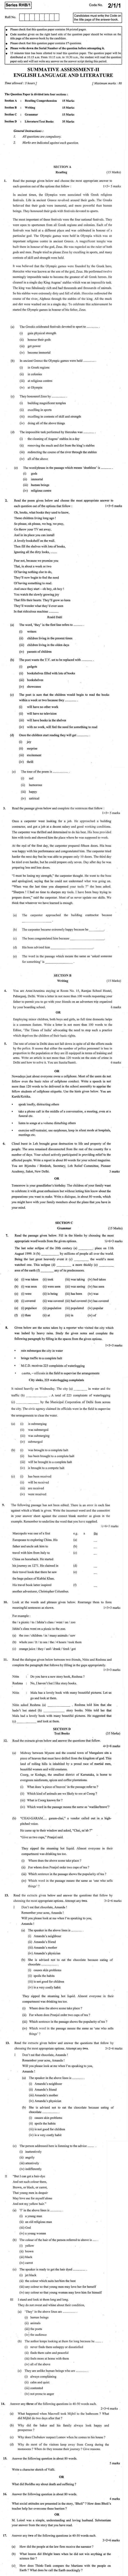 CBSE Class X Previous Year Question Papers 2011 English Lang. & Literature